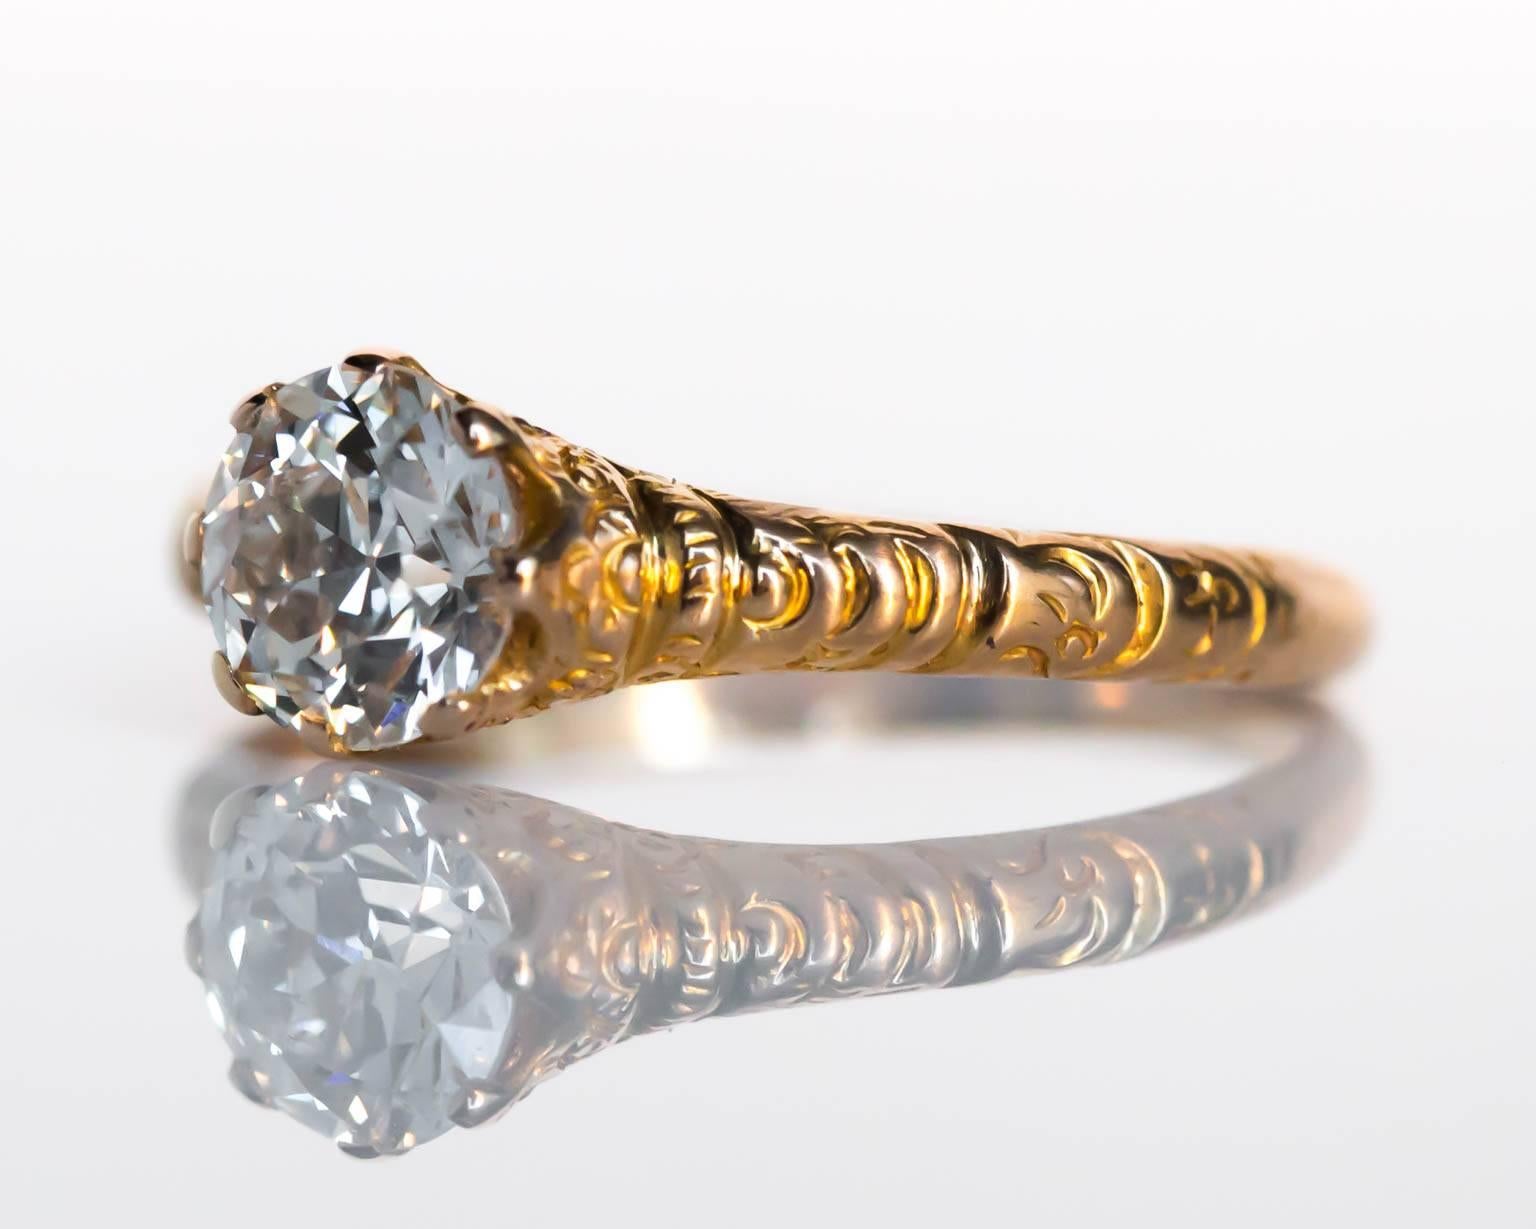 This ring features an intricate carving design around the diamond leading into the shoulders of the shank. 

Item Details: 
Ring Size: 6
Metal Type: 14 Karat Yellow Gold 
Weight: 2.6 grams

Center Diamond Details:
Shape: Old European